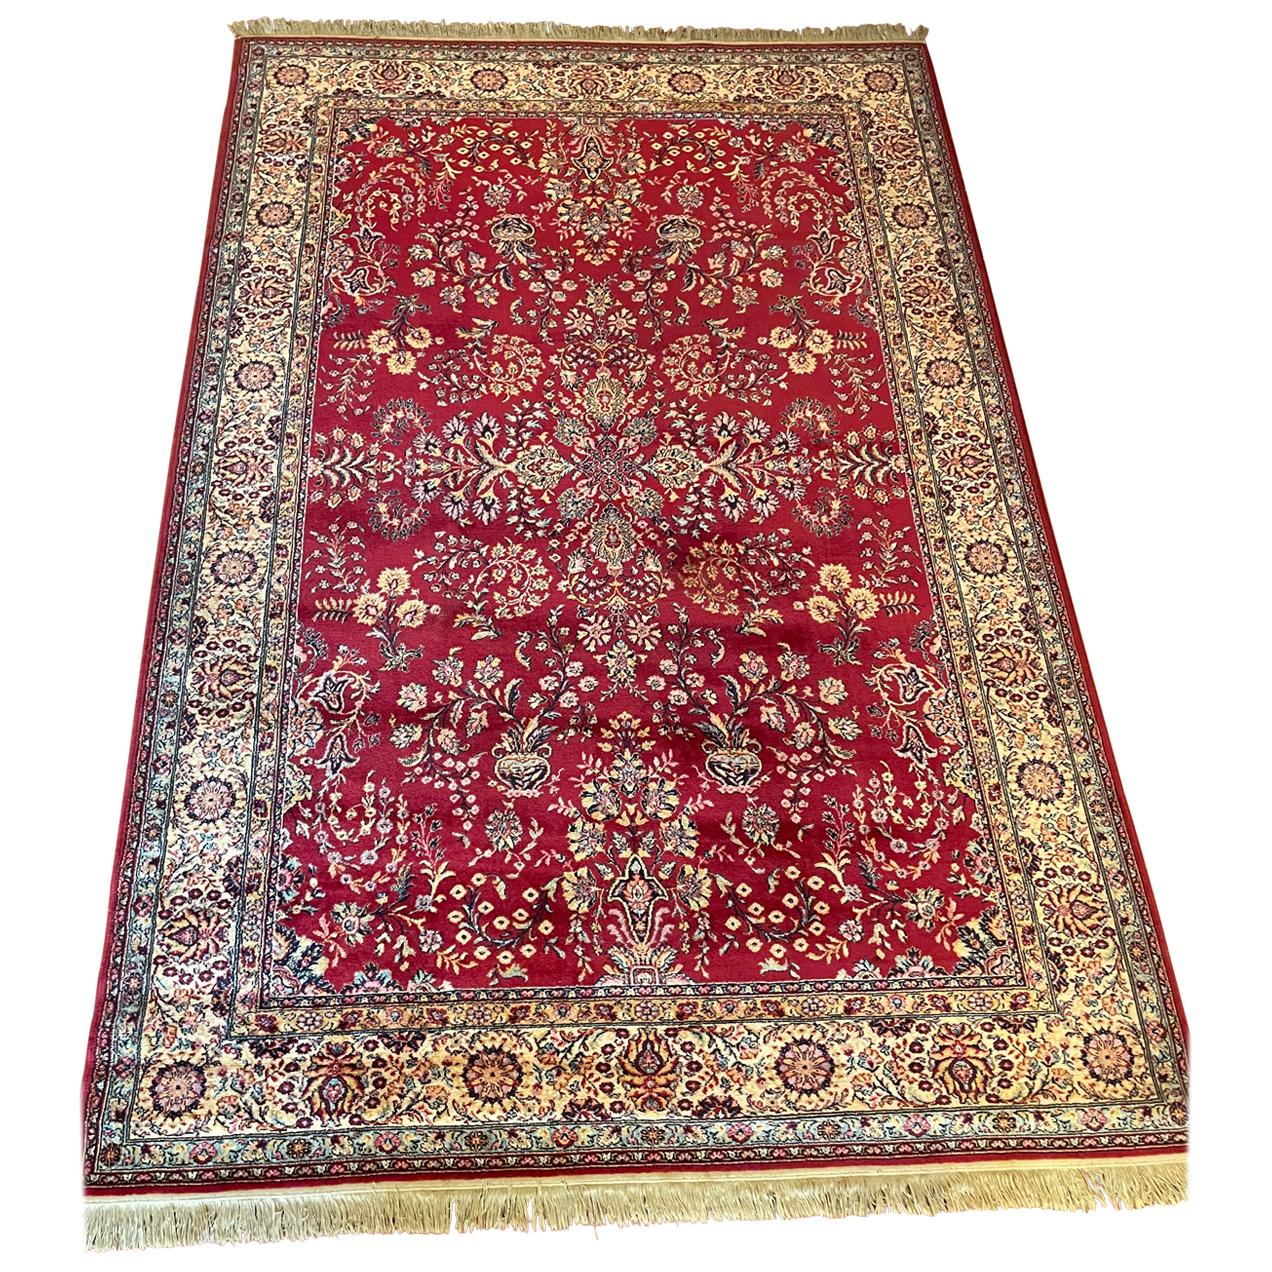 Persian Rug 2M13-2M02 with Red Decor For Sale